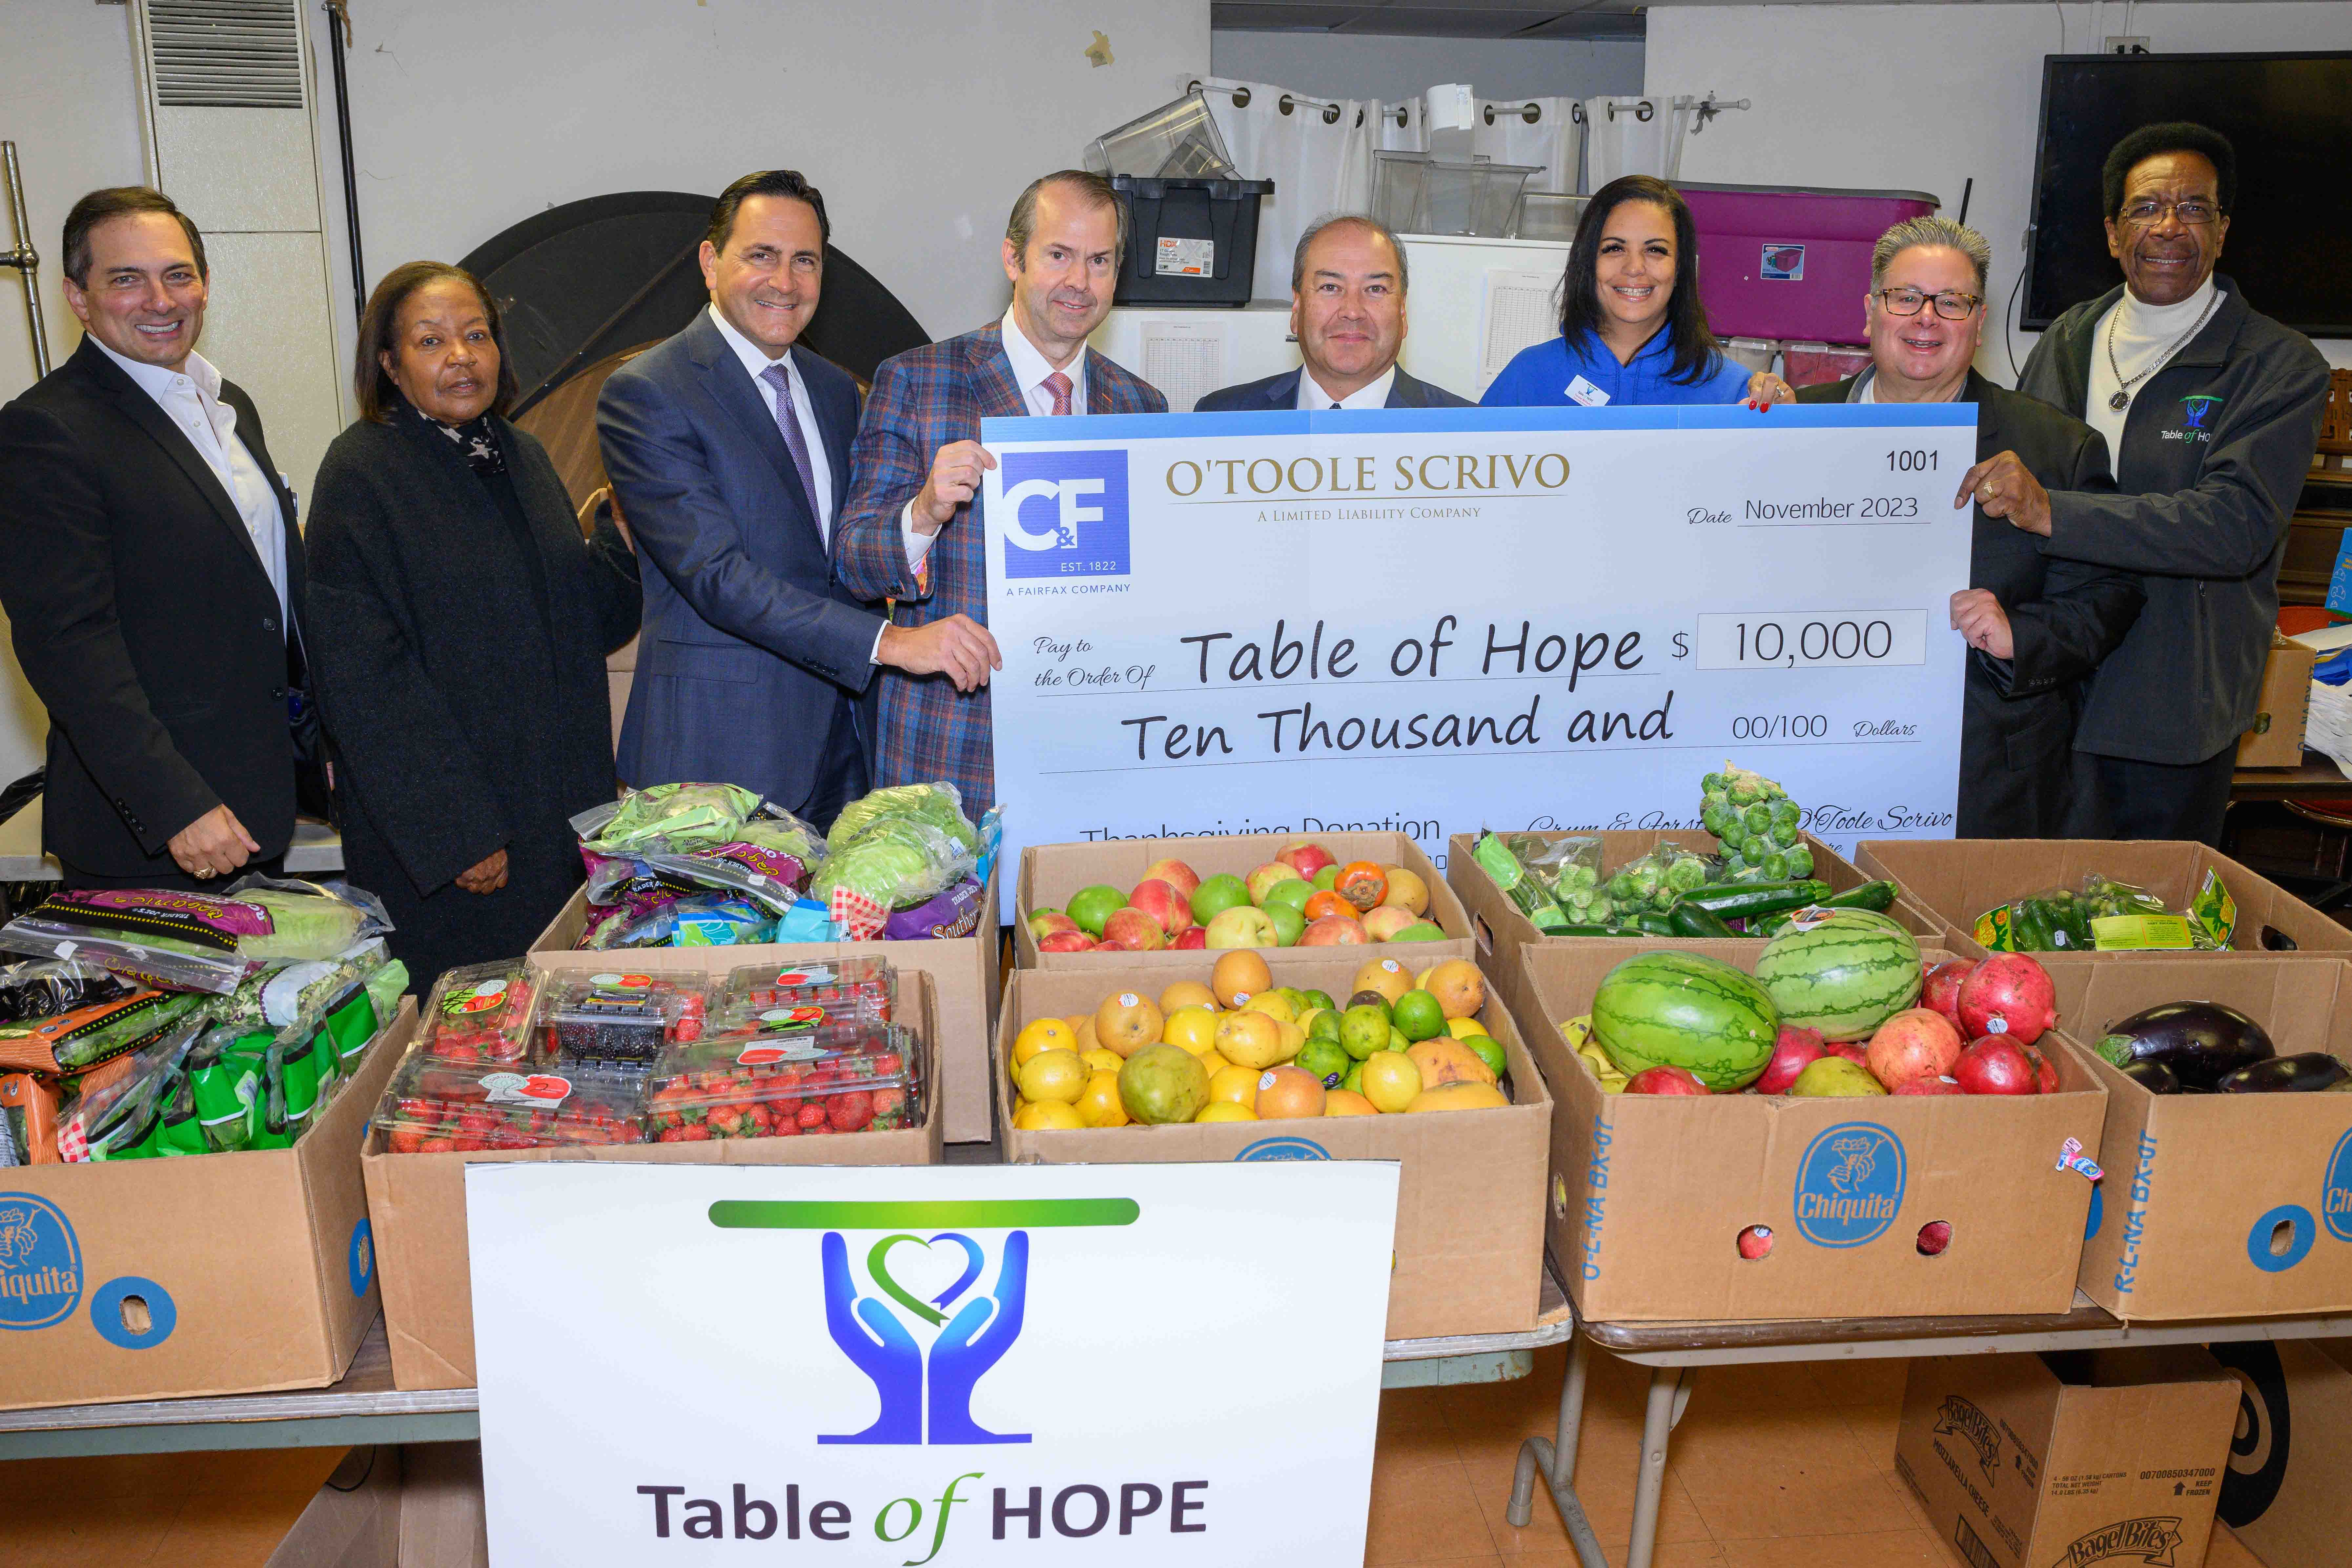 OS and Crum & Forster Donate $80,000 to Food Banks for Third Consecutive Year